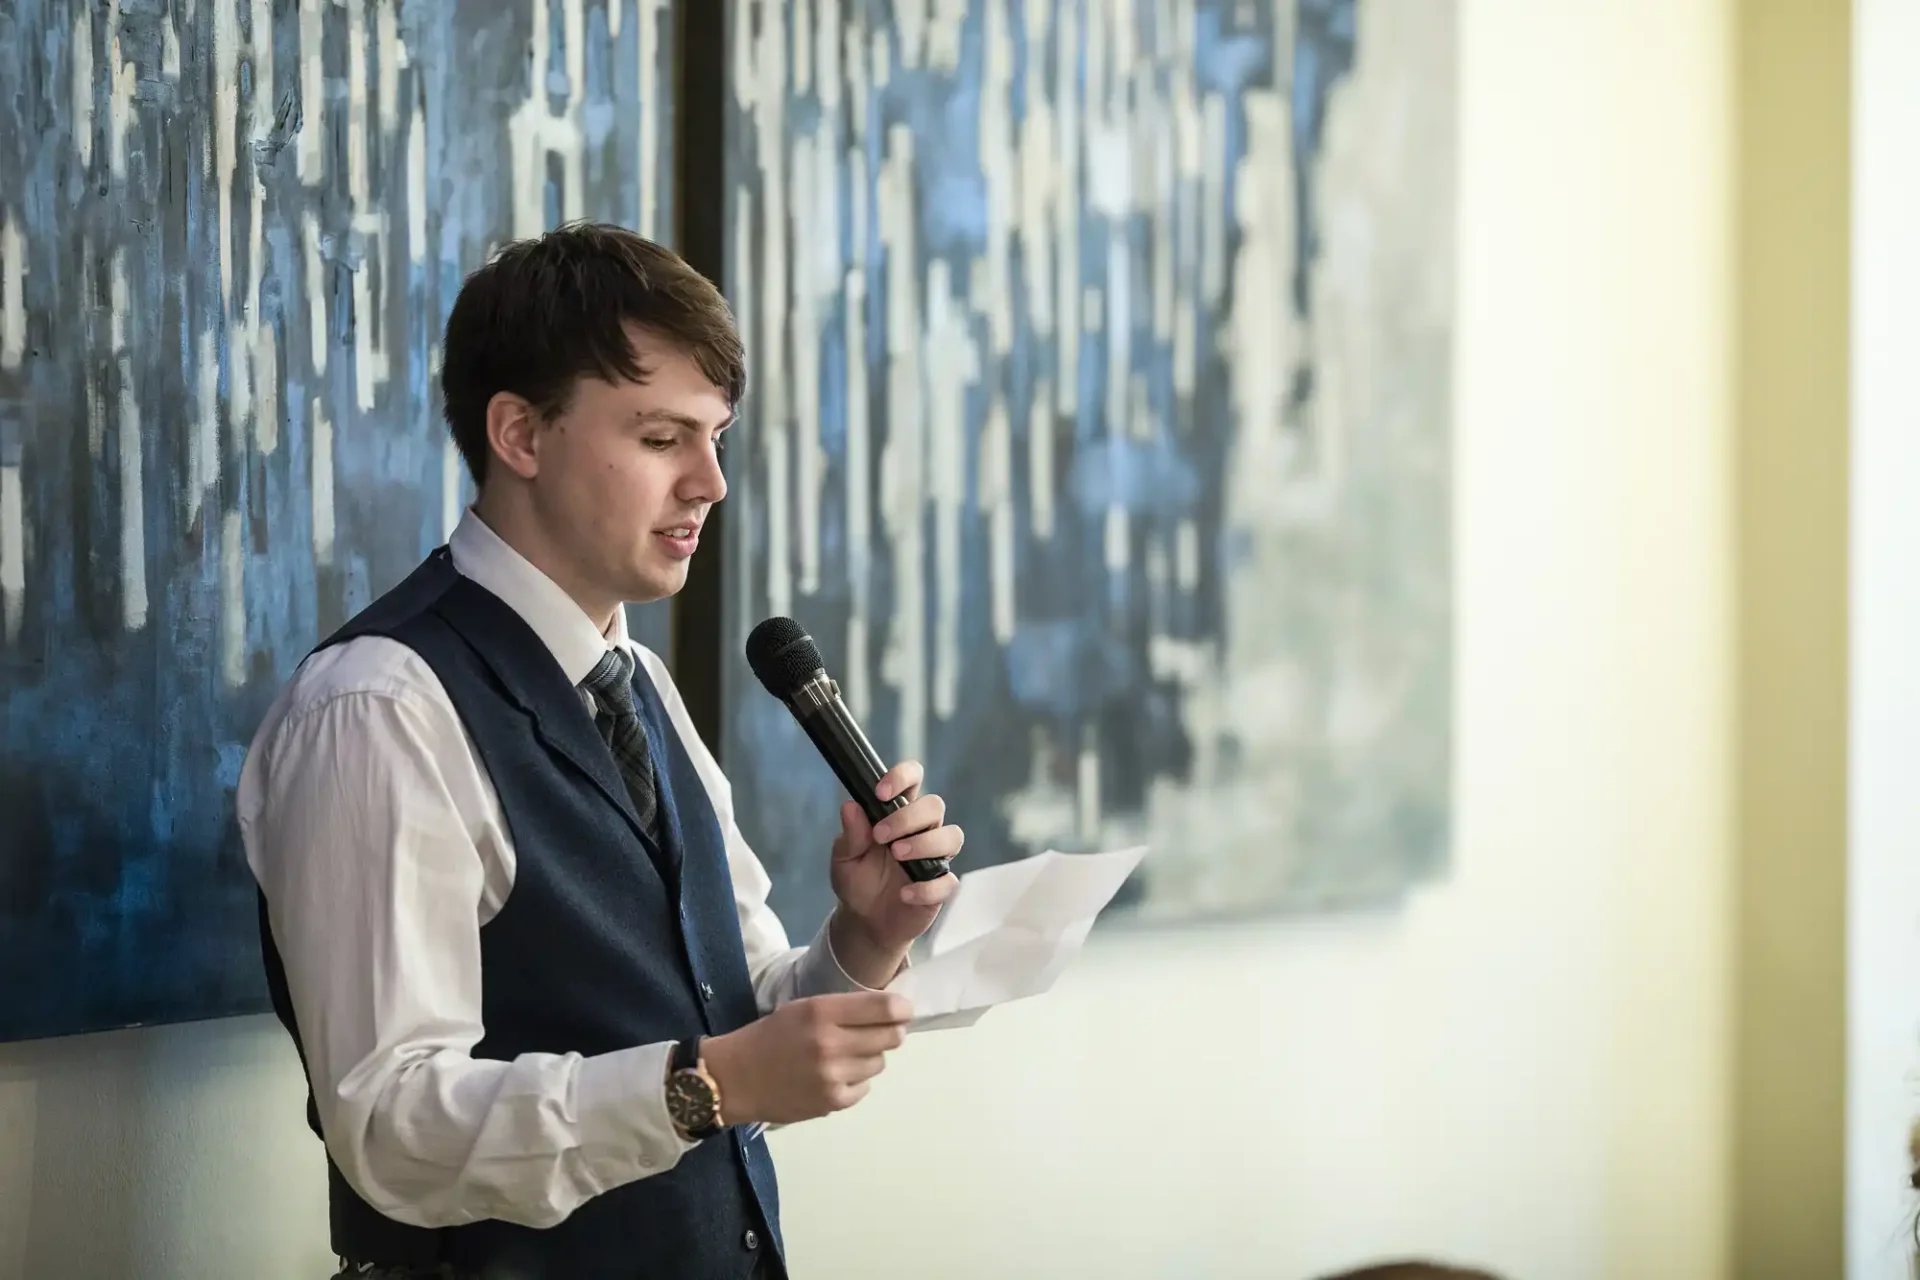 A young man in a vest and tie reading from a paper and speaking into a microphone against a backdrop of a blue abstract painting.